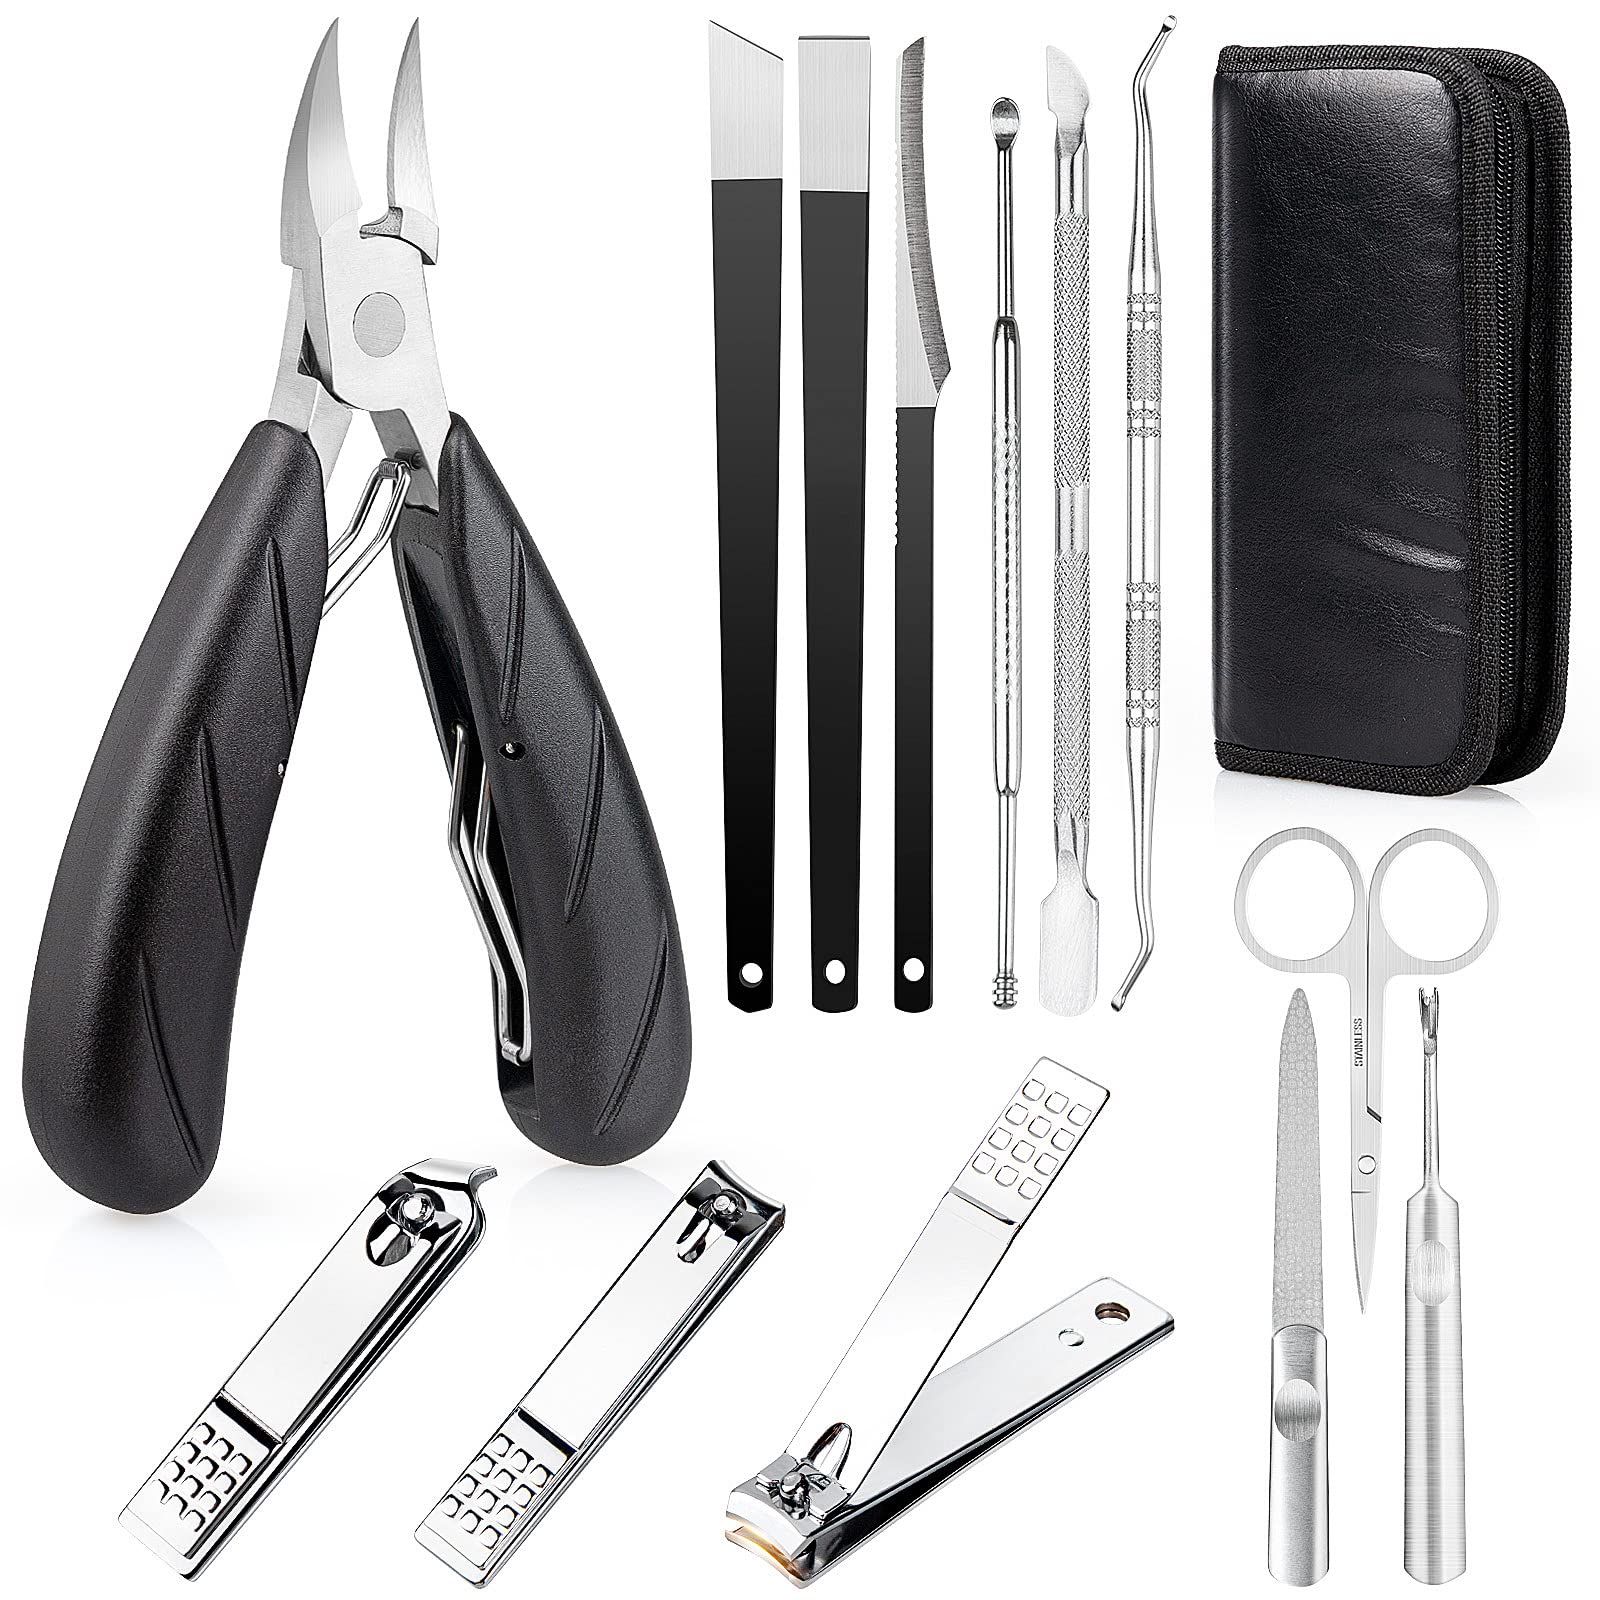 8 Pcs Toenail Clippers, Thick & Ingrown Toe Nail Clippers for Men & Seniors,  Pedicure Clippers Toenail Cutters